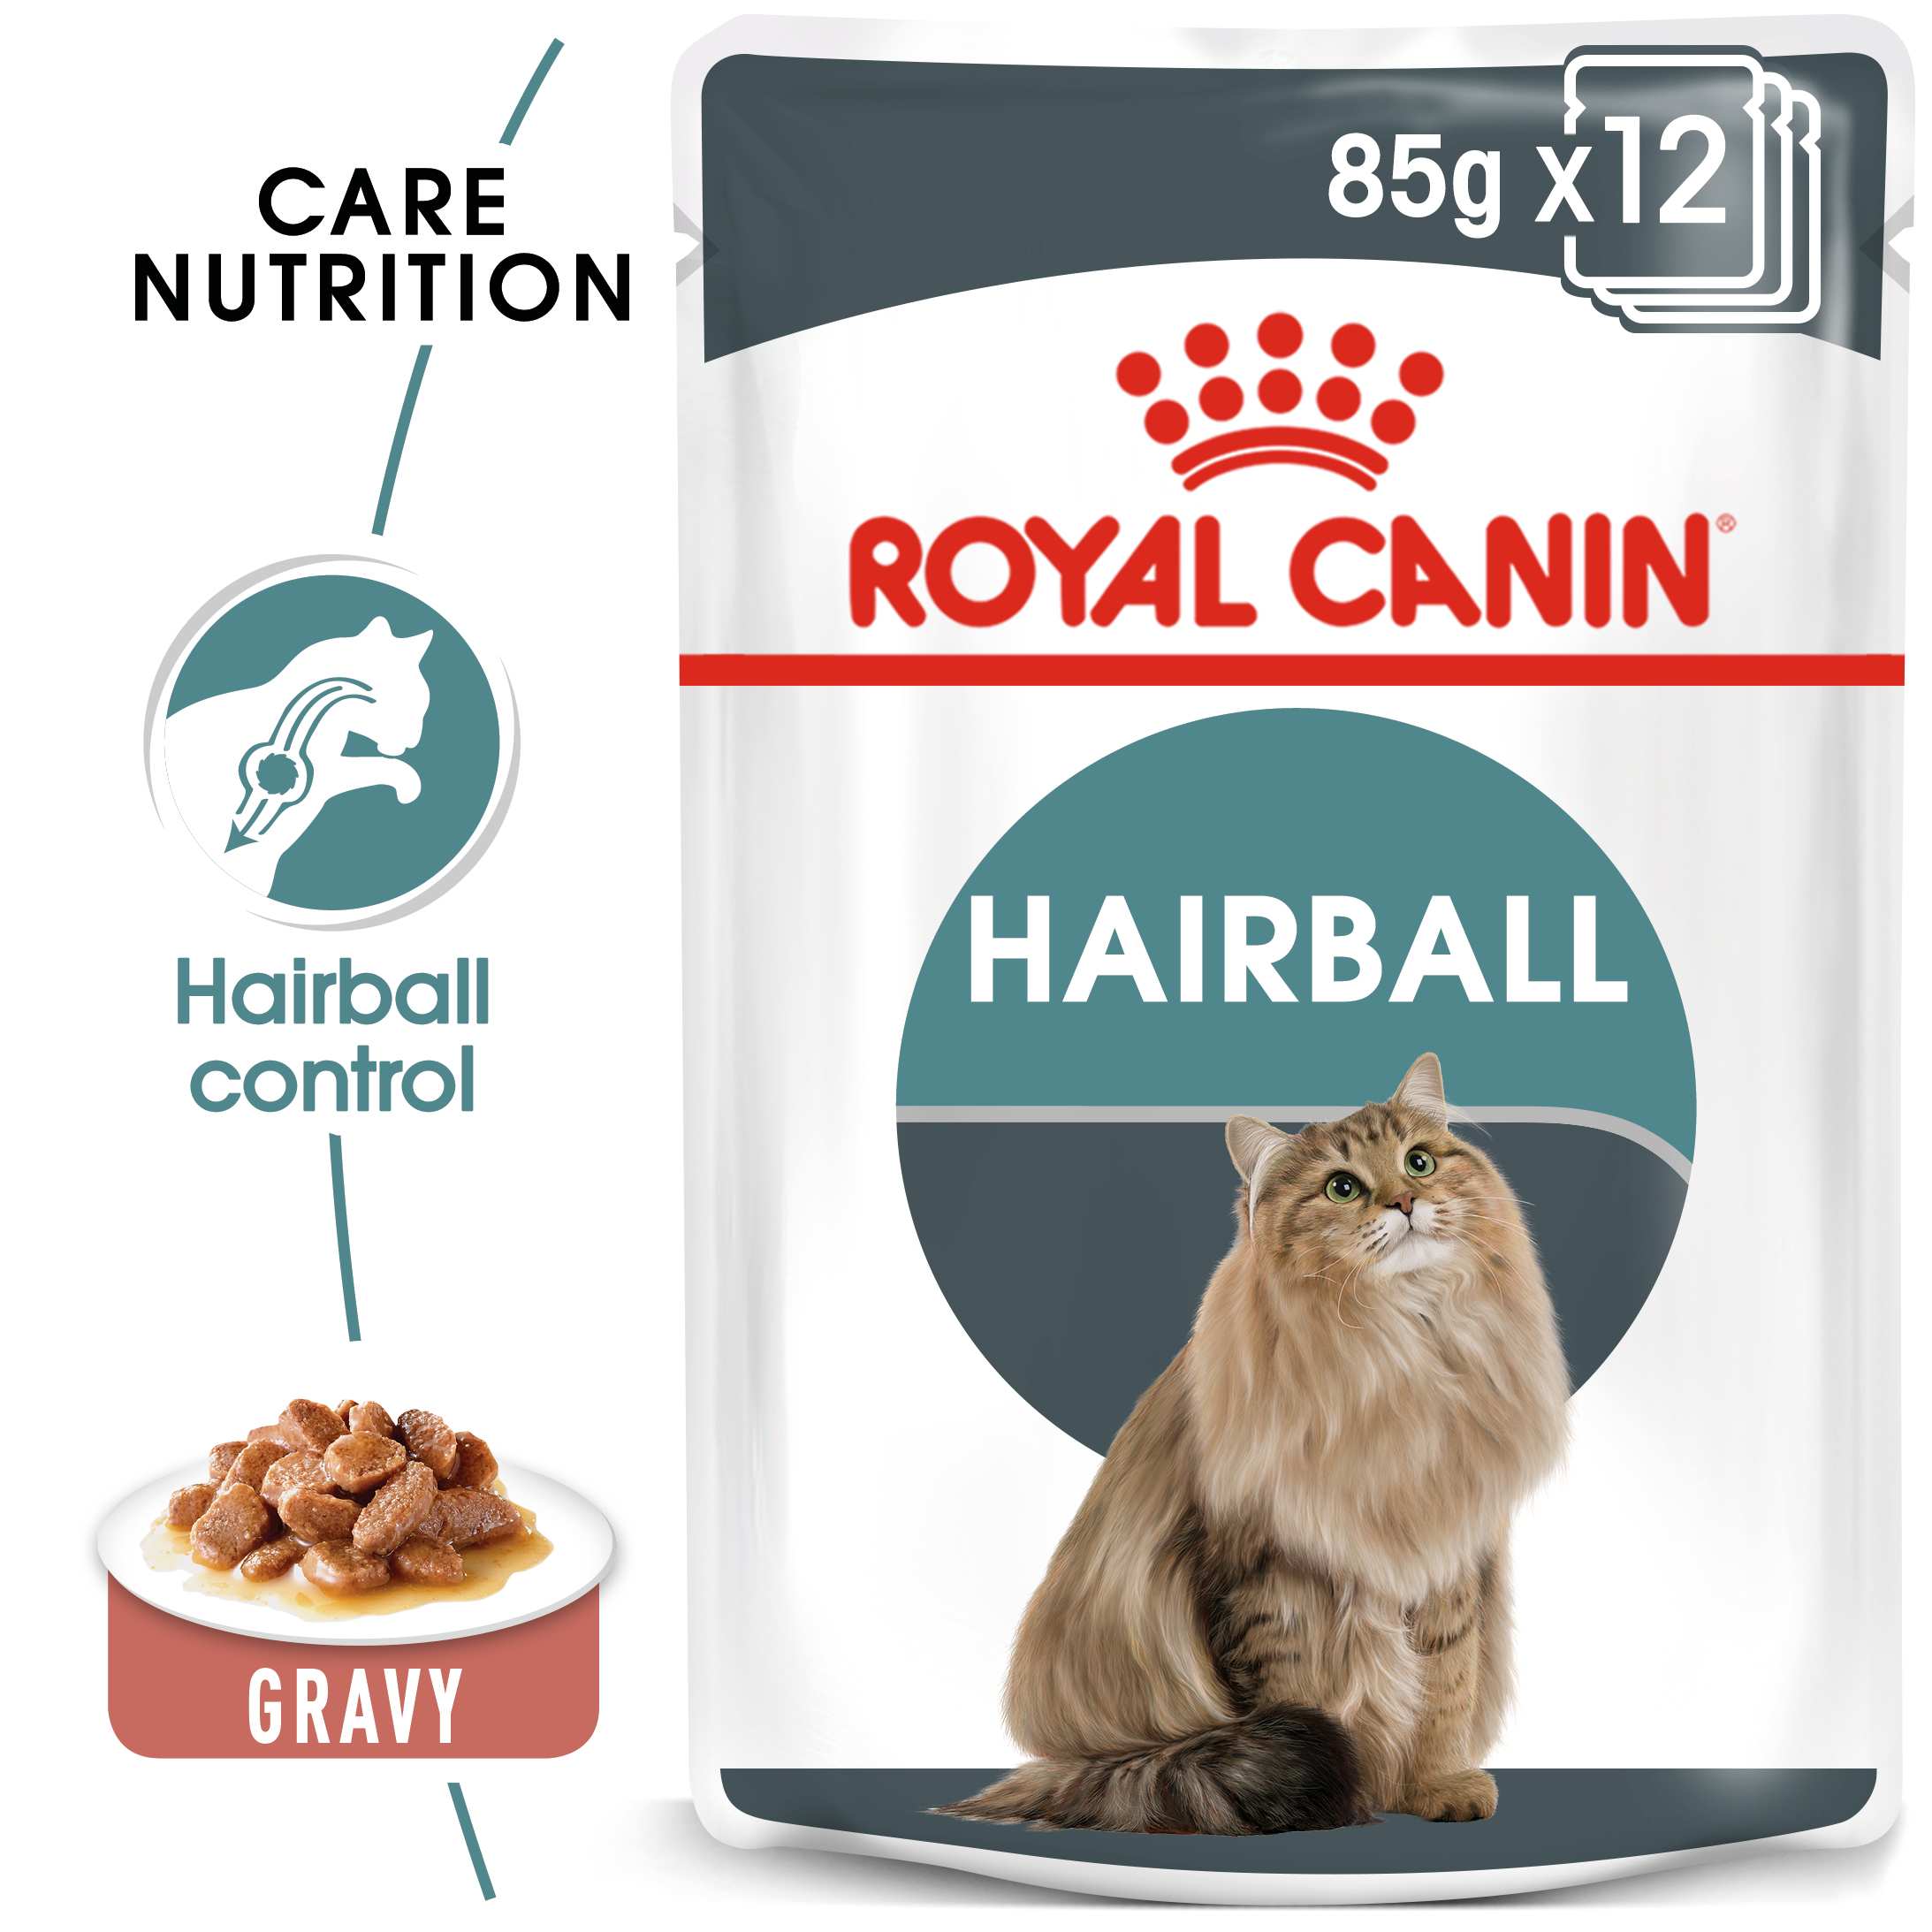 Hairball Care Thin Slices In Gravy